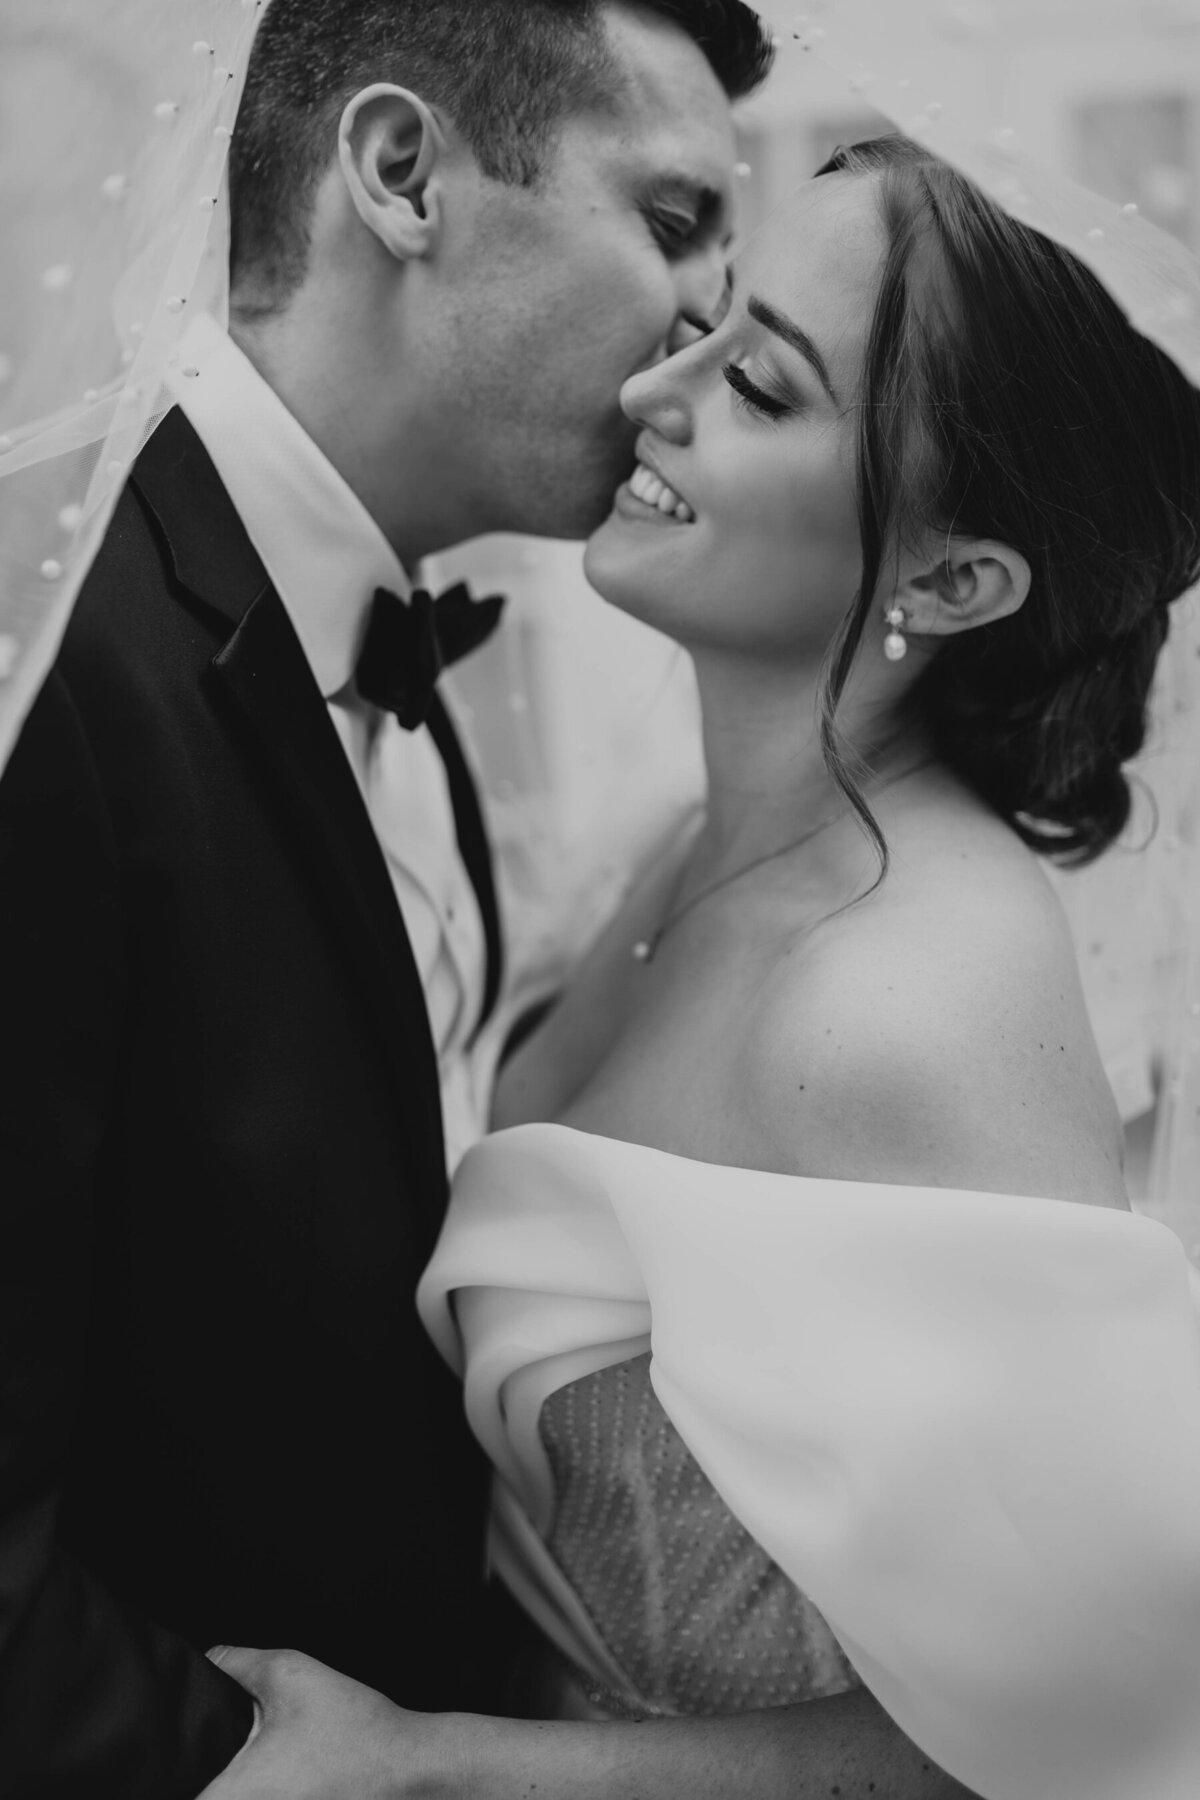 Black and white portrait of groom kissing his bride on the cheek.